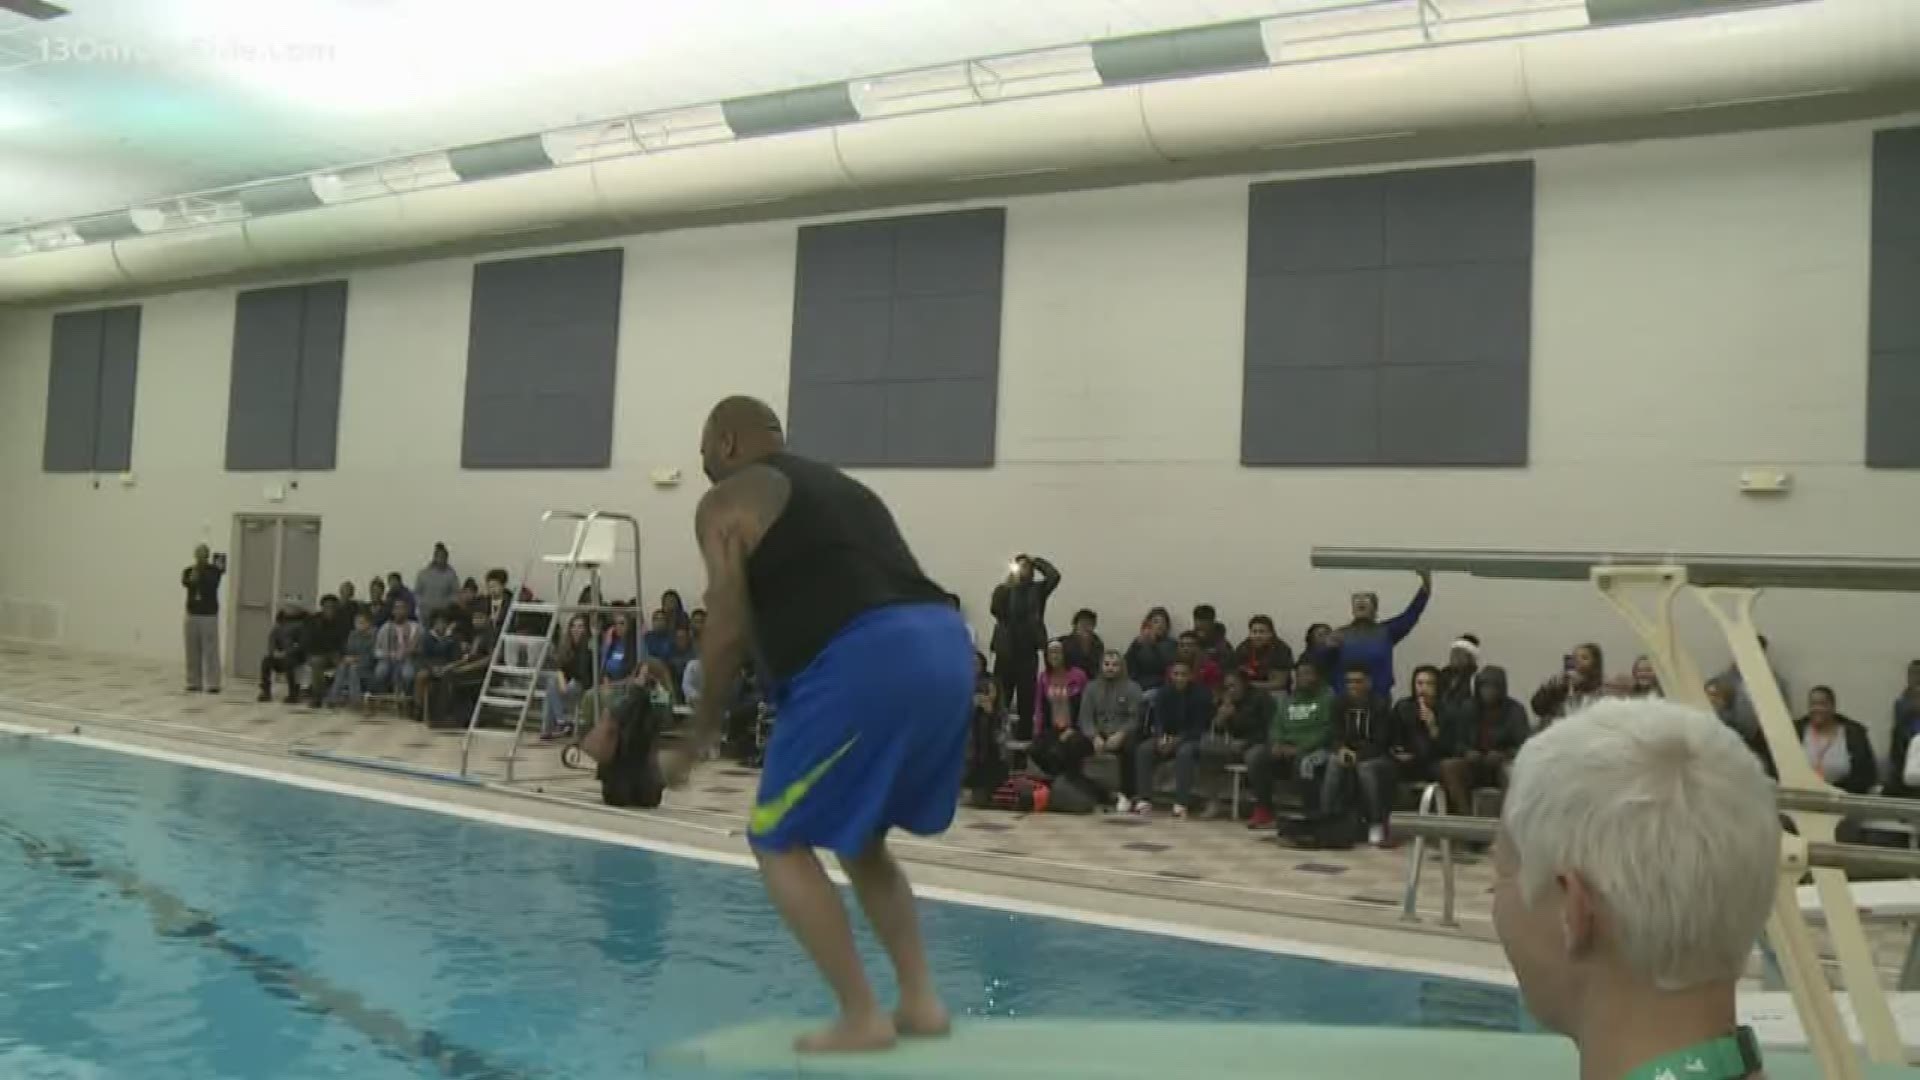 It's been over seven years since Muskegon Heights had a functioning swimming pool.